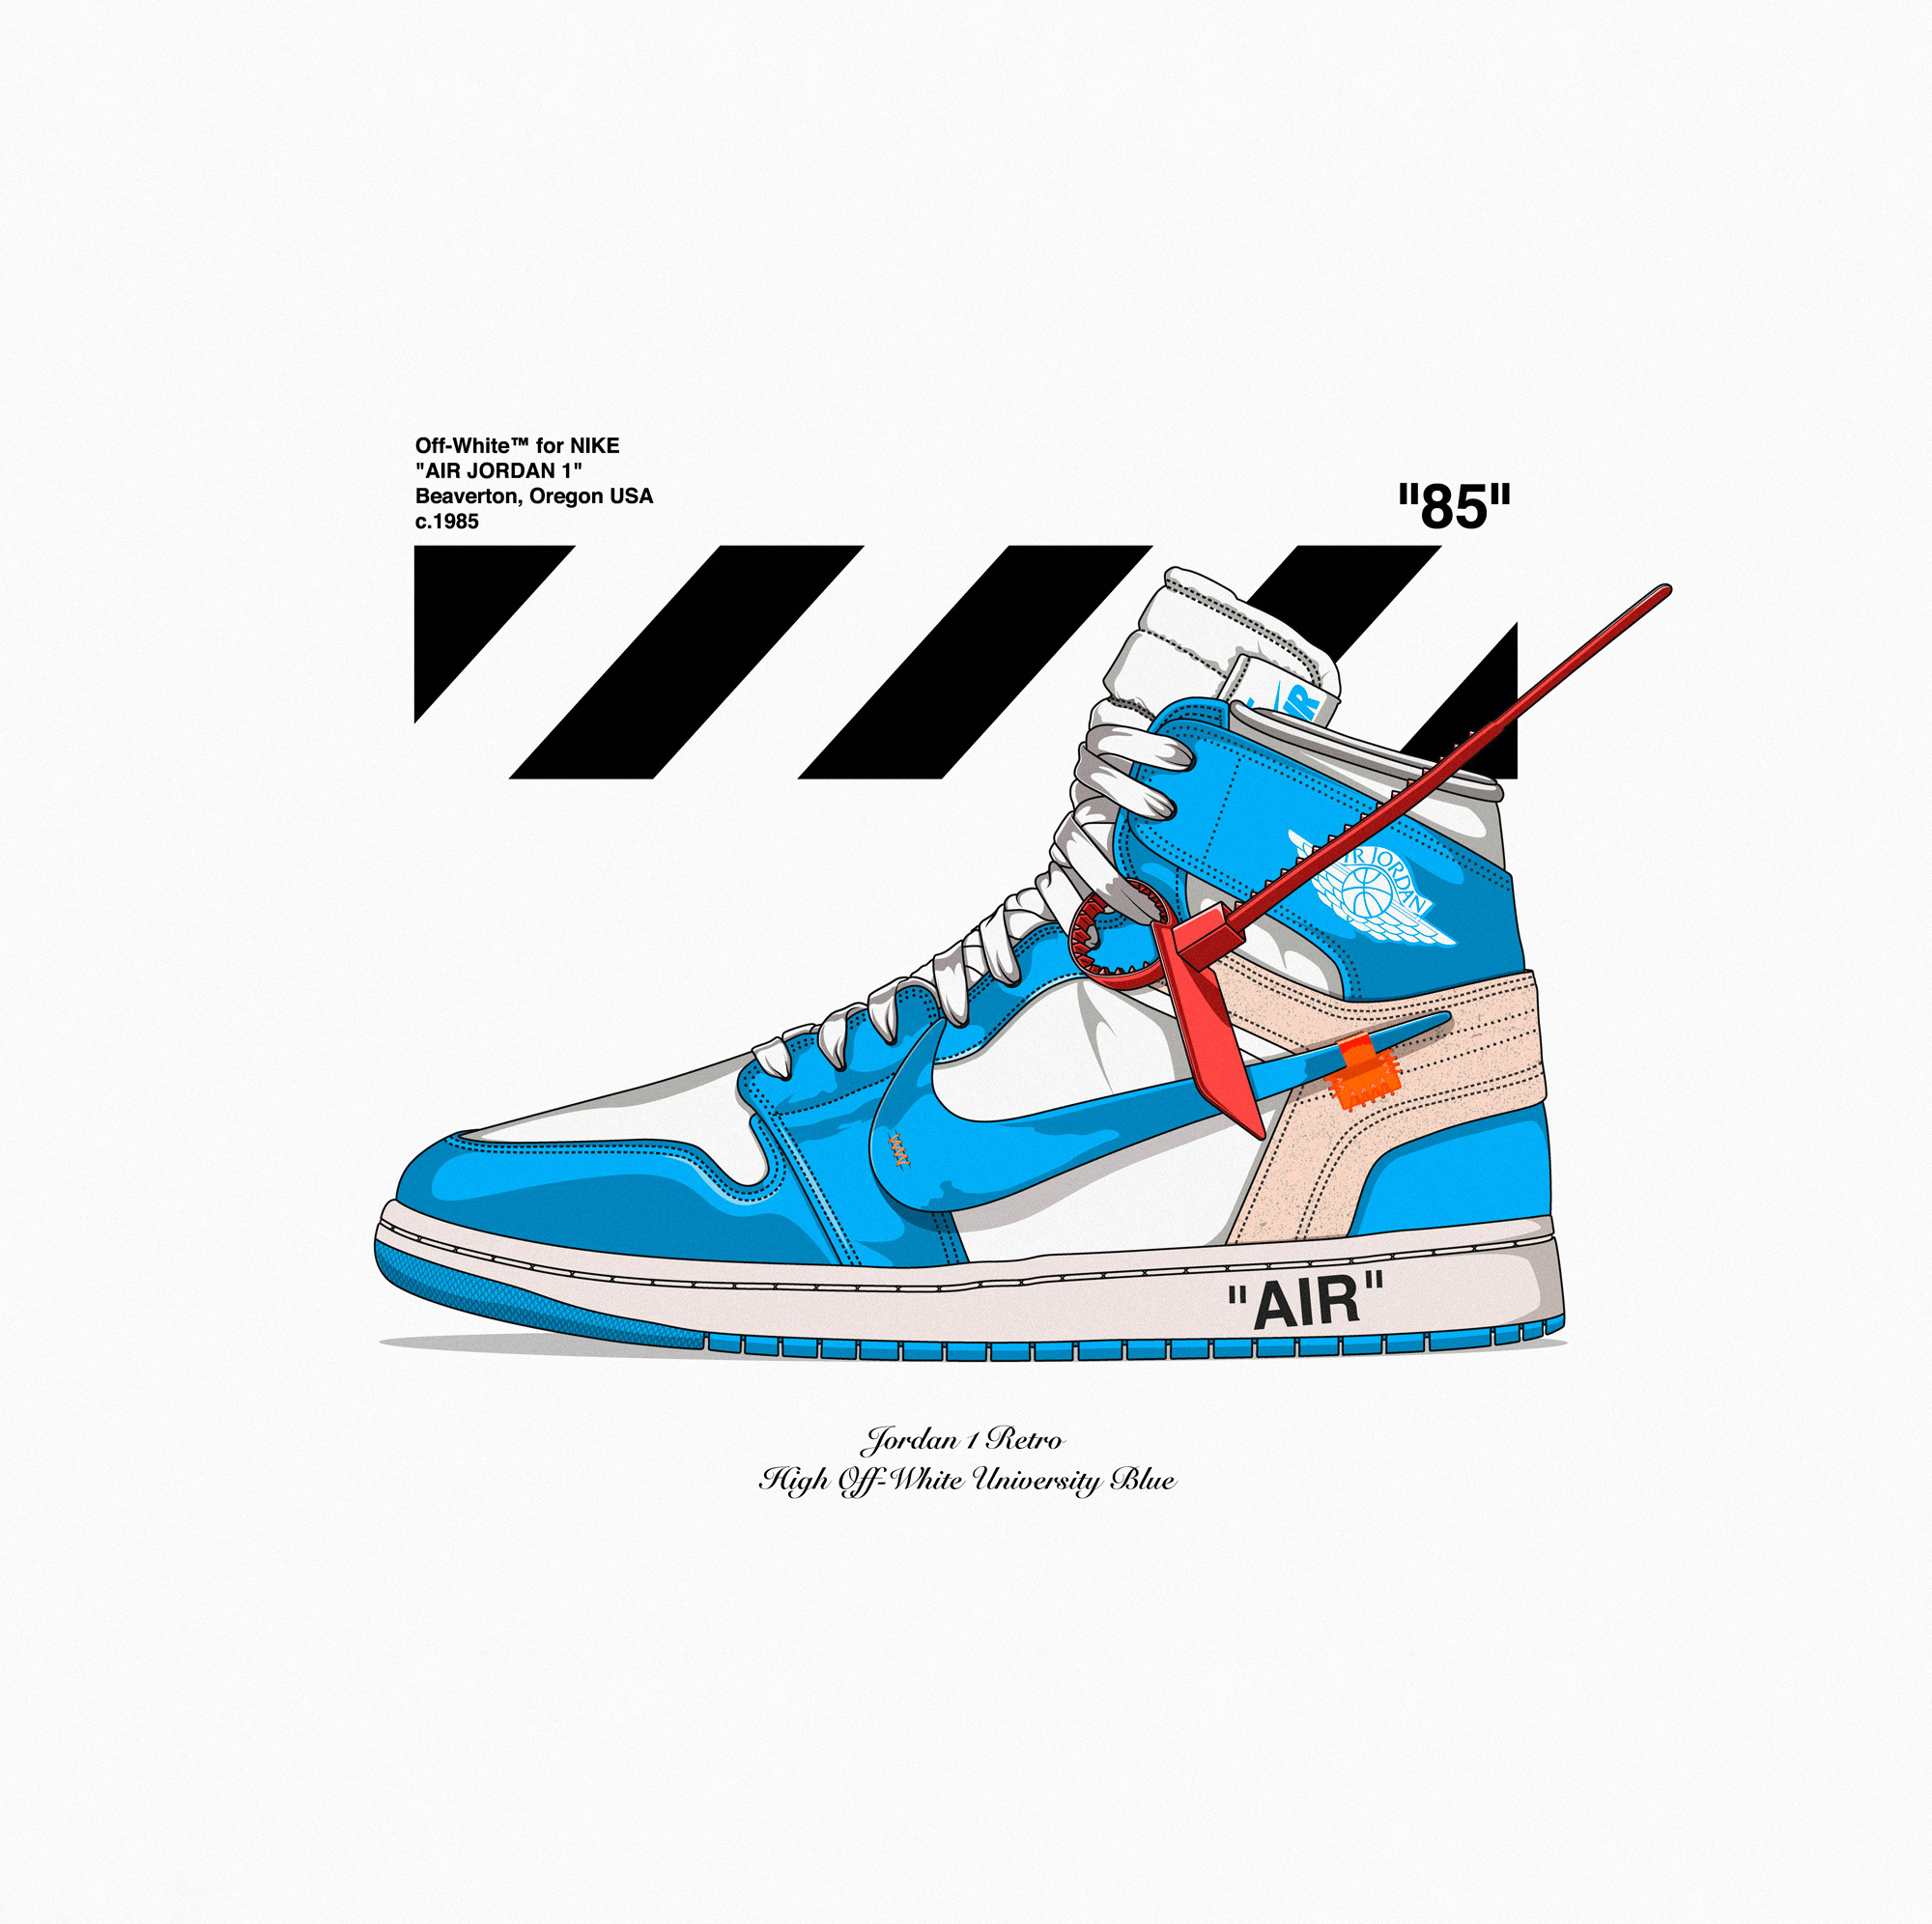 JORDAN 1 "OFF-WHITE" Projects | videos, logos, illustrations and branding on Behance